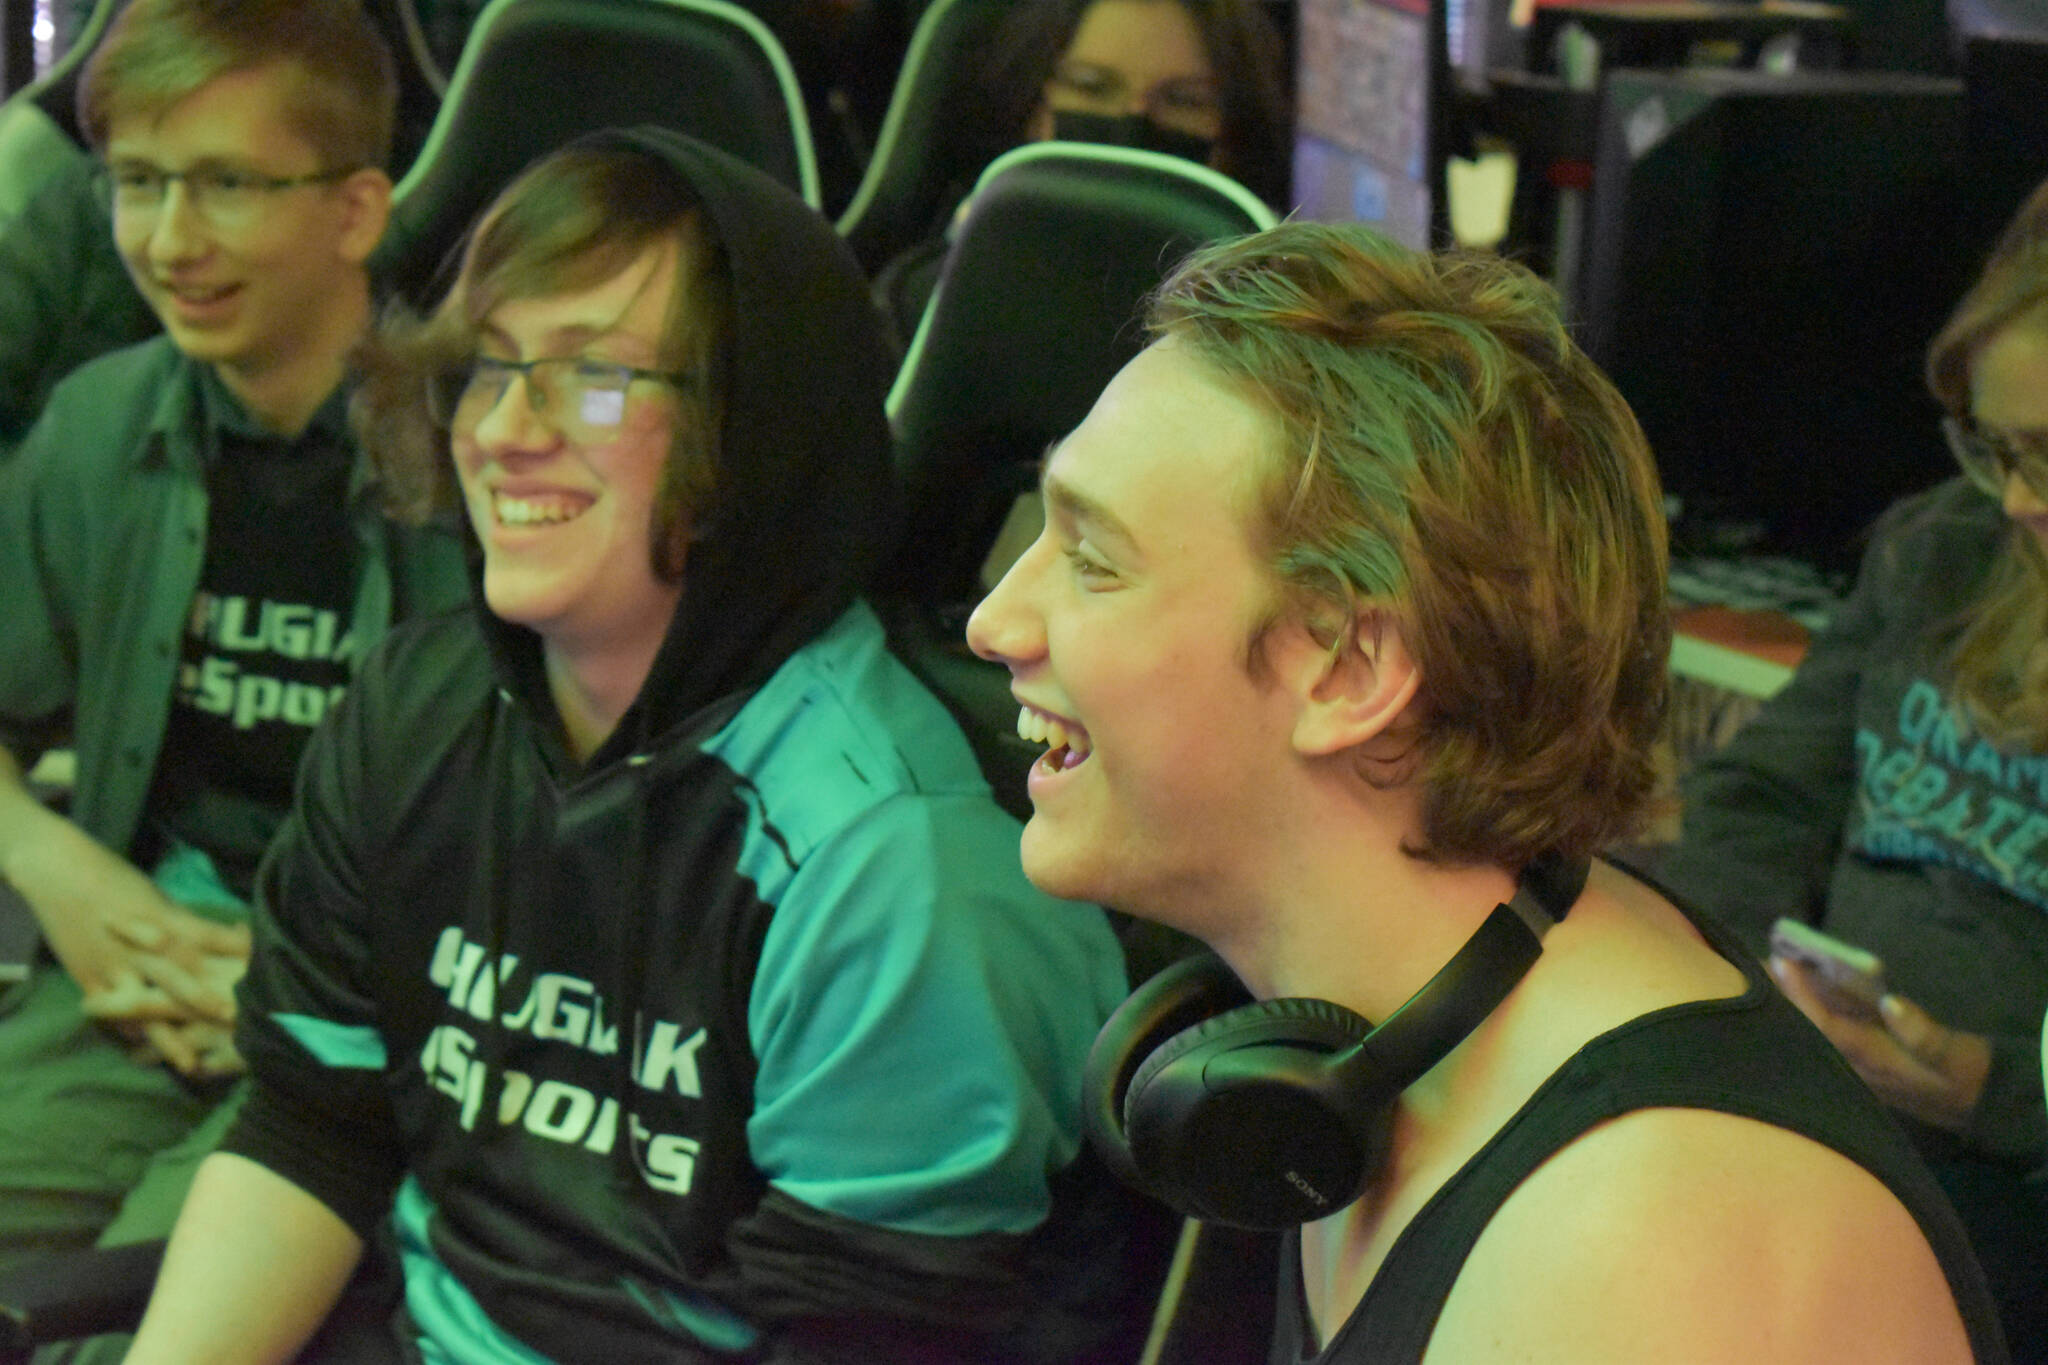 Chugiak’s Addison Rains and Kenai’s Kage Adkins laugh together while they compete in the final match of the Super Smash Bros. Ultimate State Championship on Saturday, April 22, 2023, at the University of Alaska Anchorage Esports Lounge in Anchorage, Alaska. (Jake Dye/Peninsula Clarion)